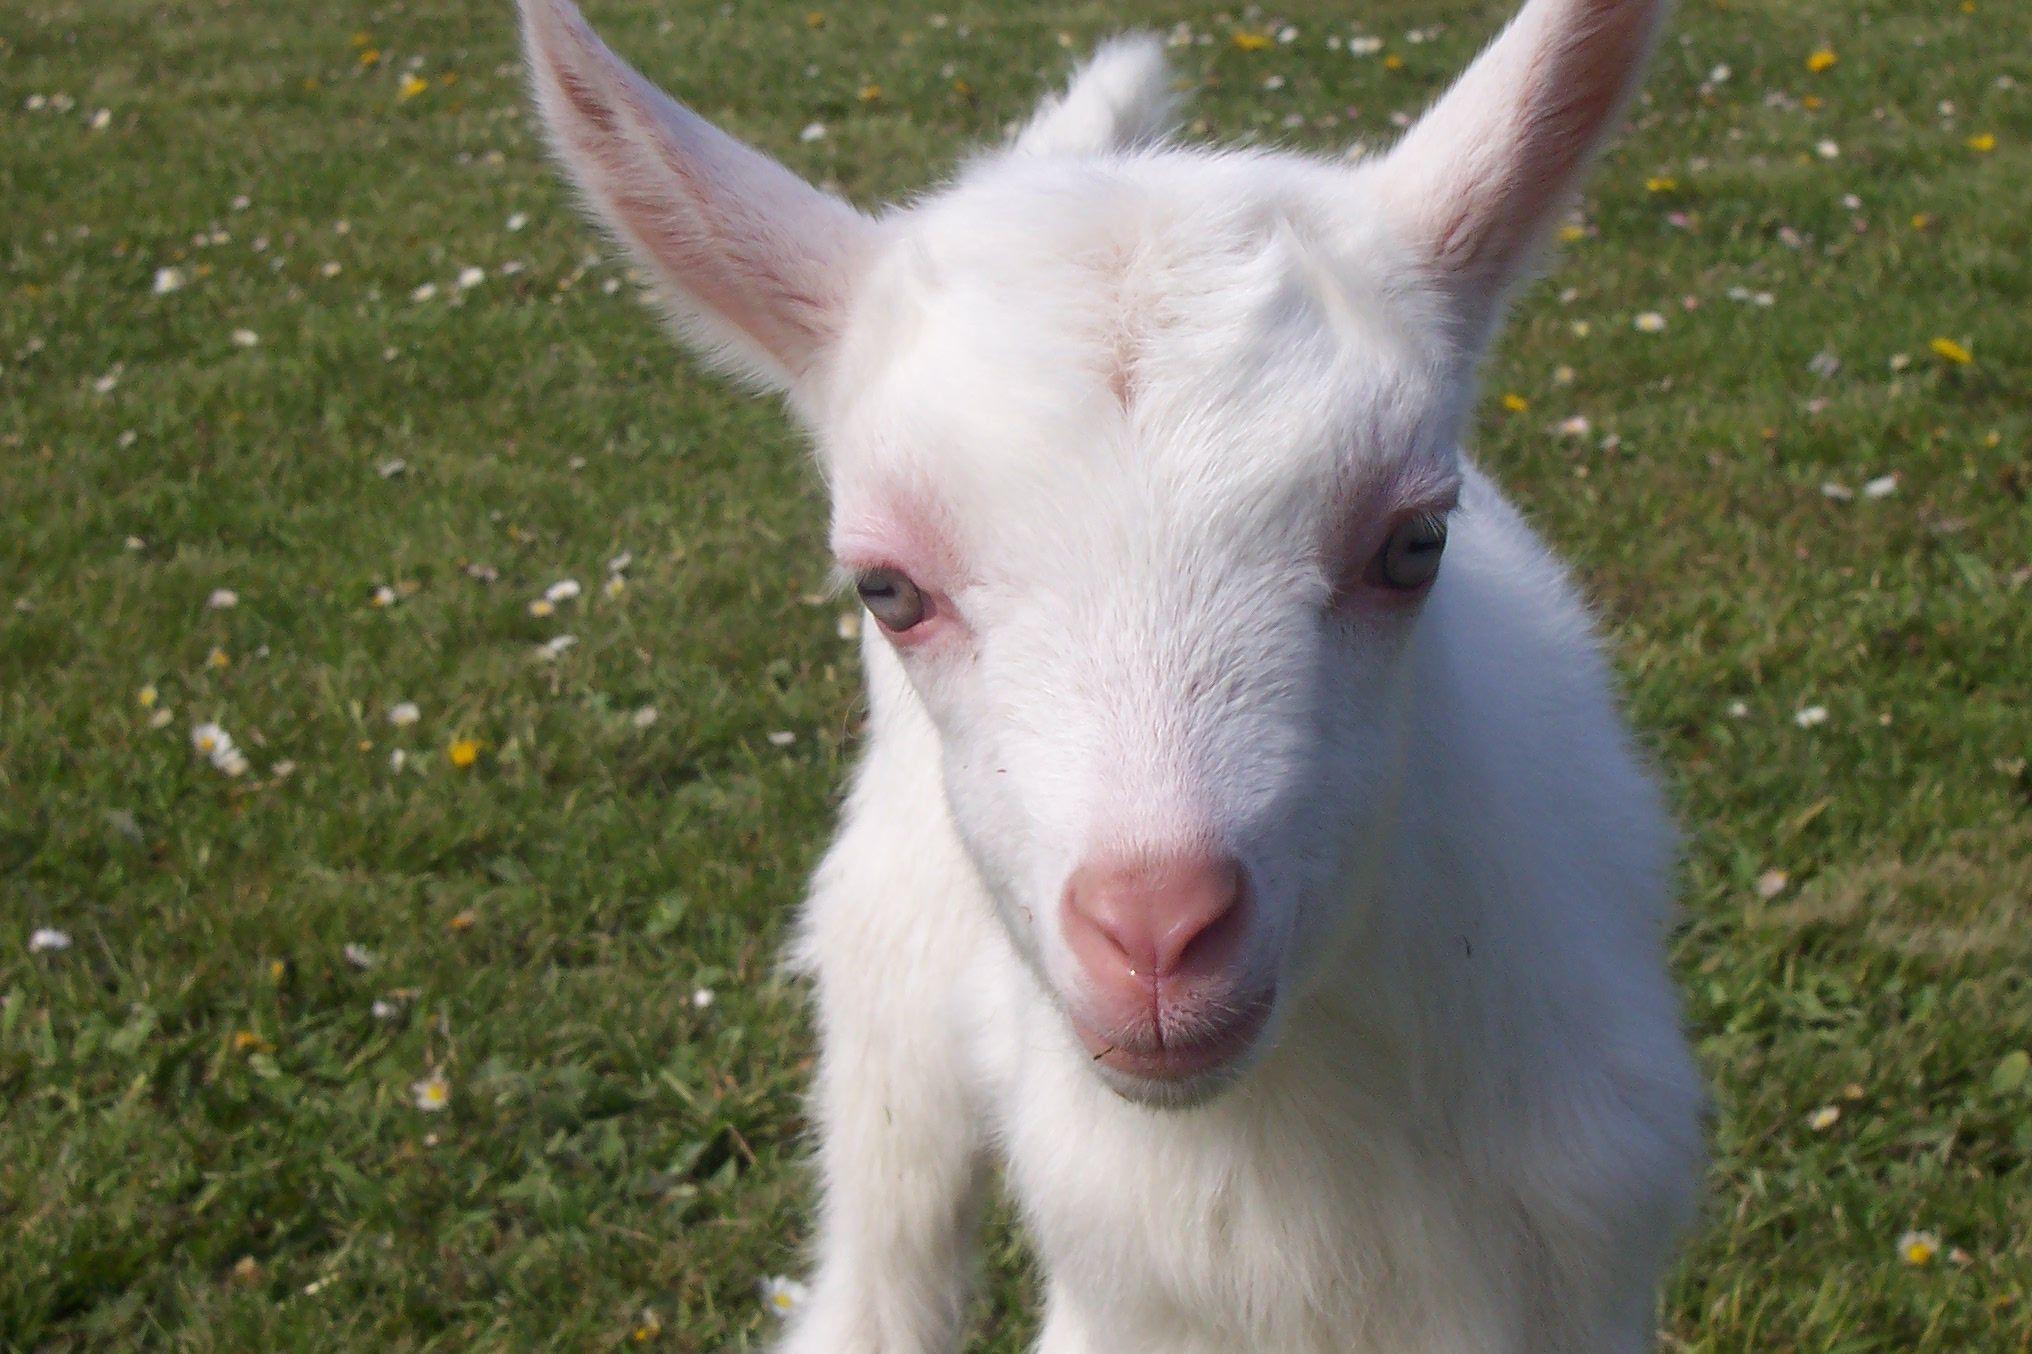 Baby and Funny Animal Photo: Cute Baby Goat Photo